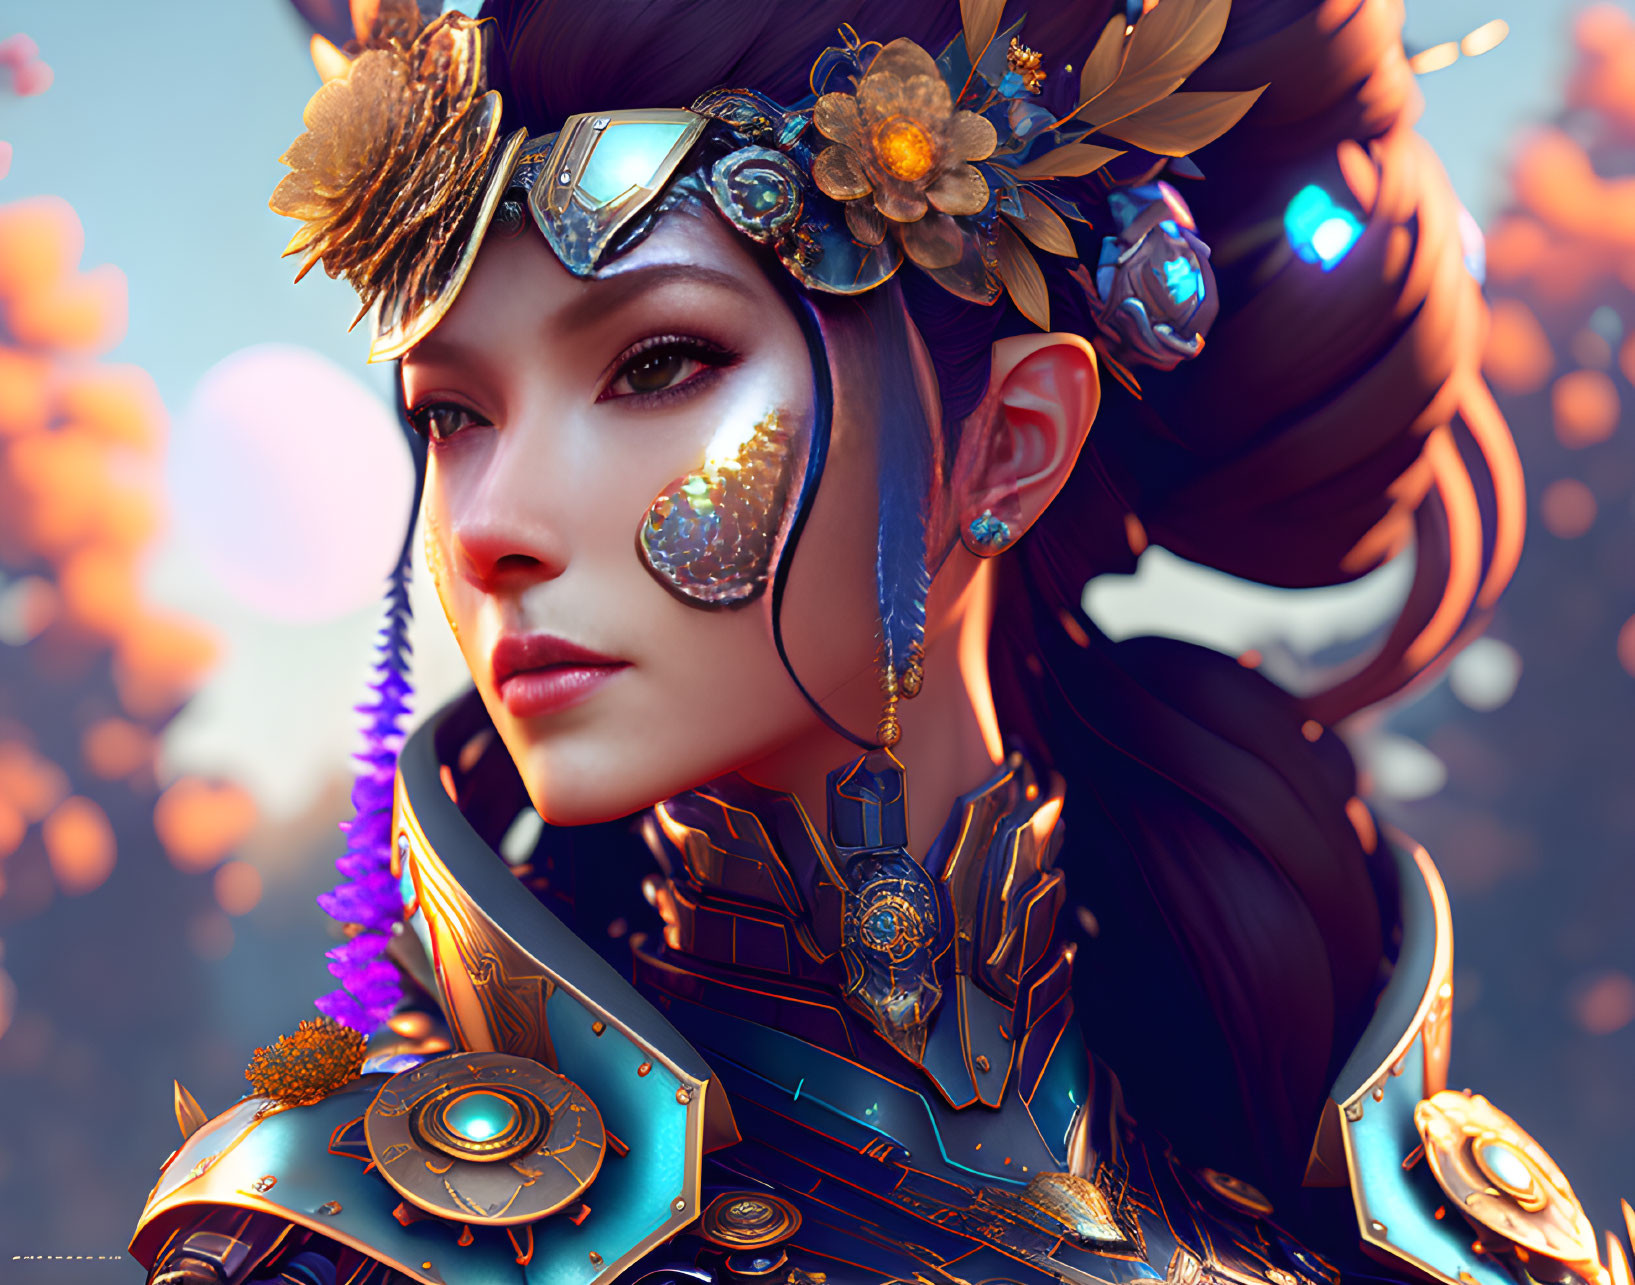 Digital art portrait of woman in futuristic blue and gold armor with ornate headdress and facial jewelry on